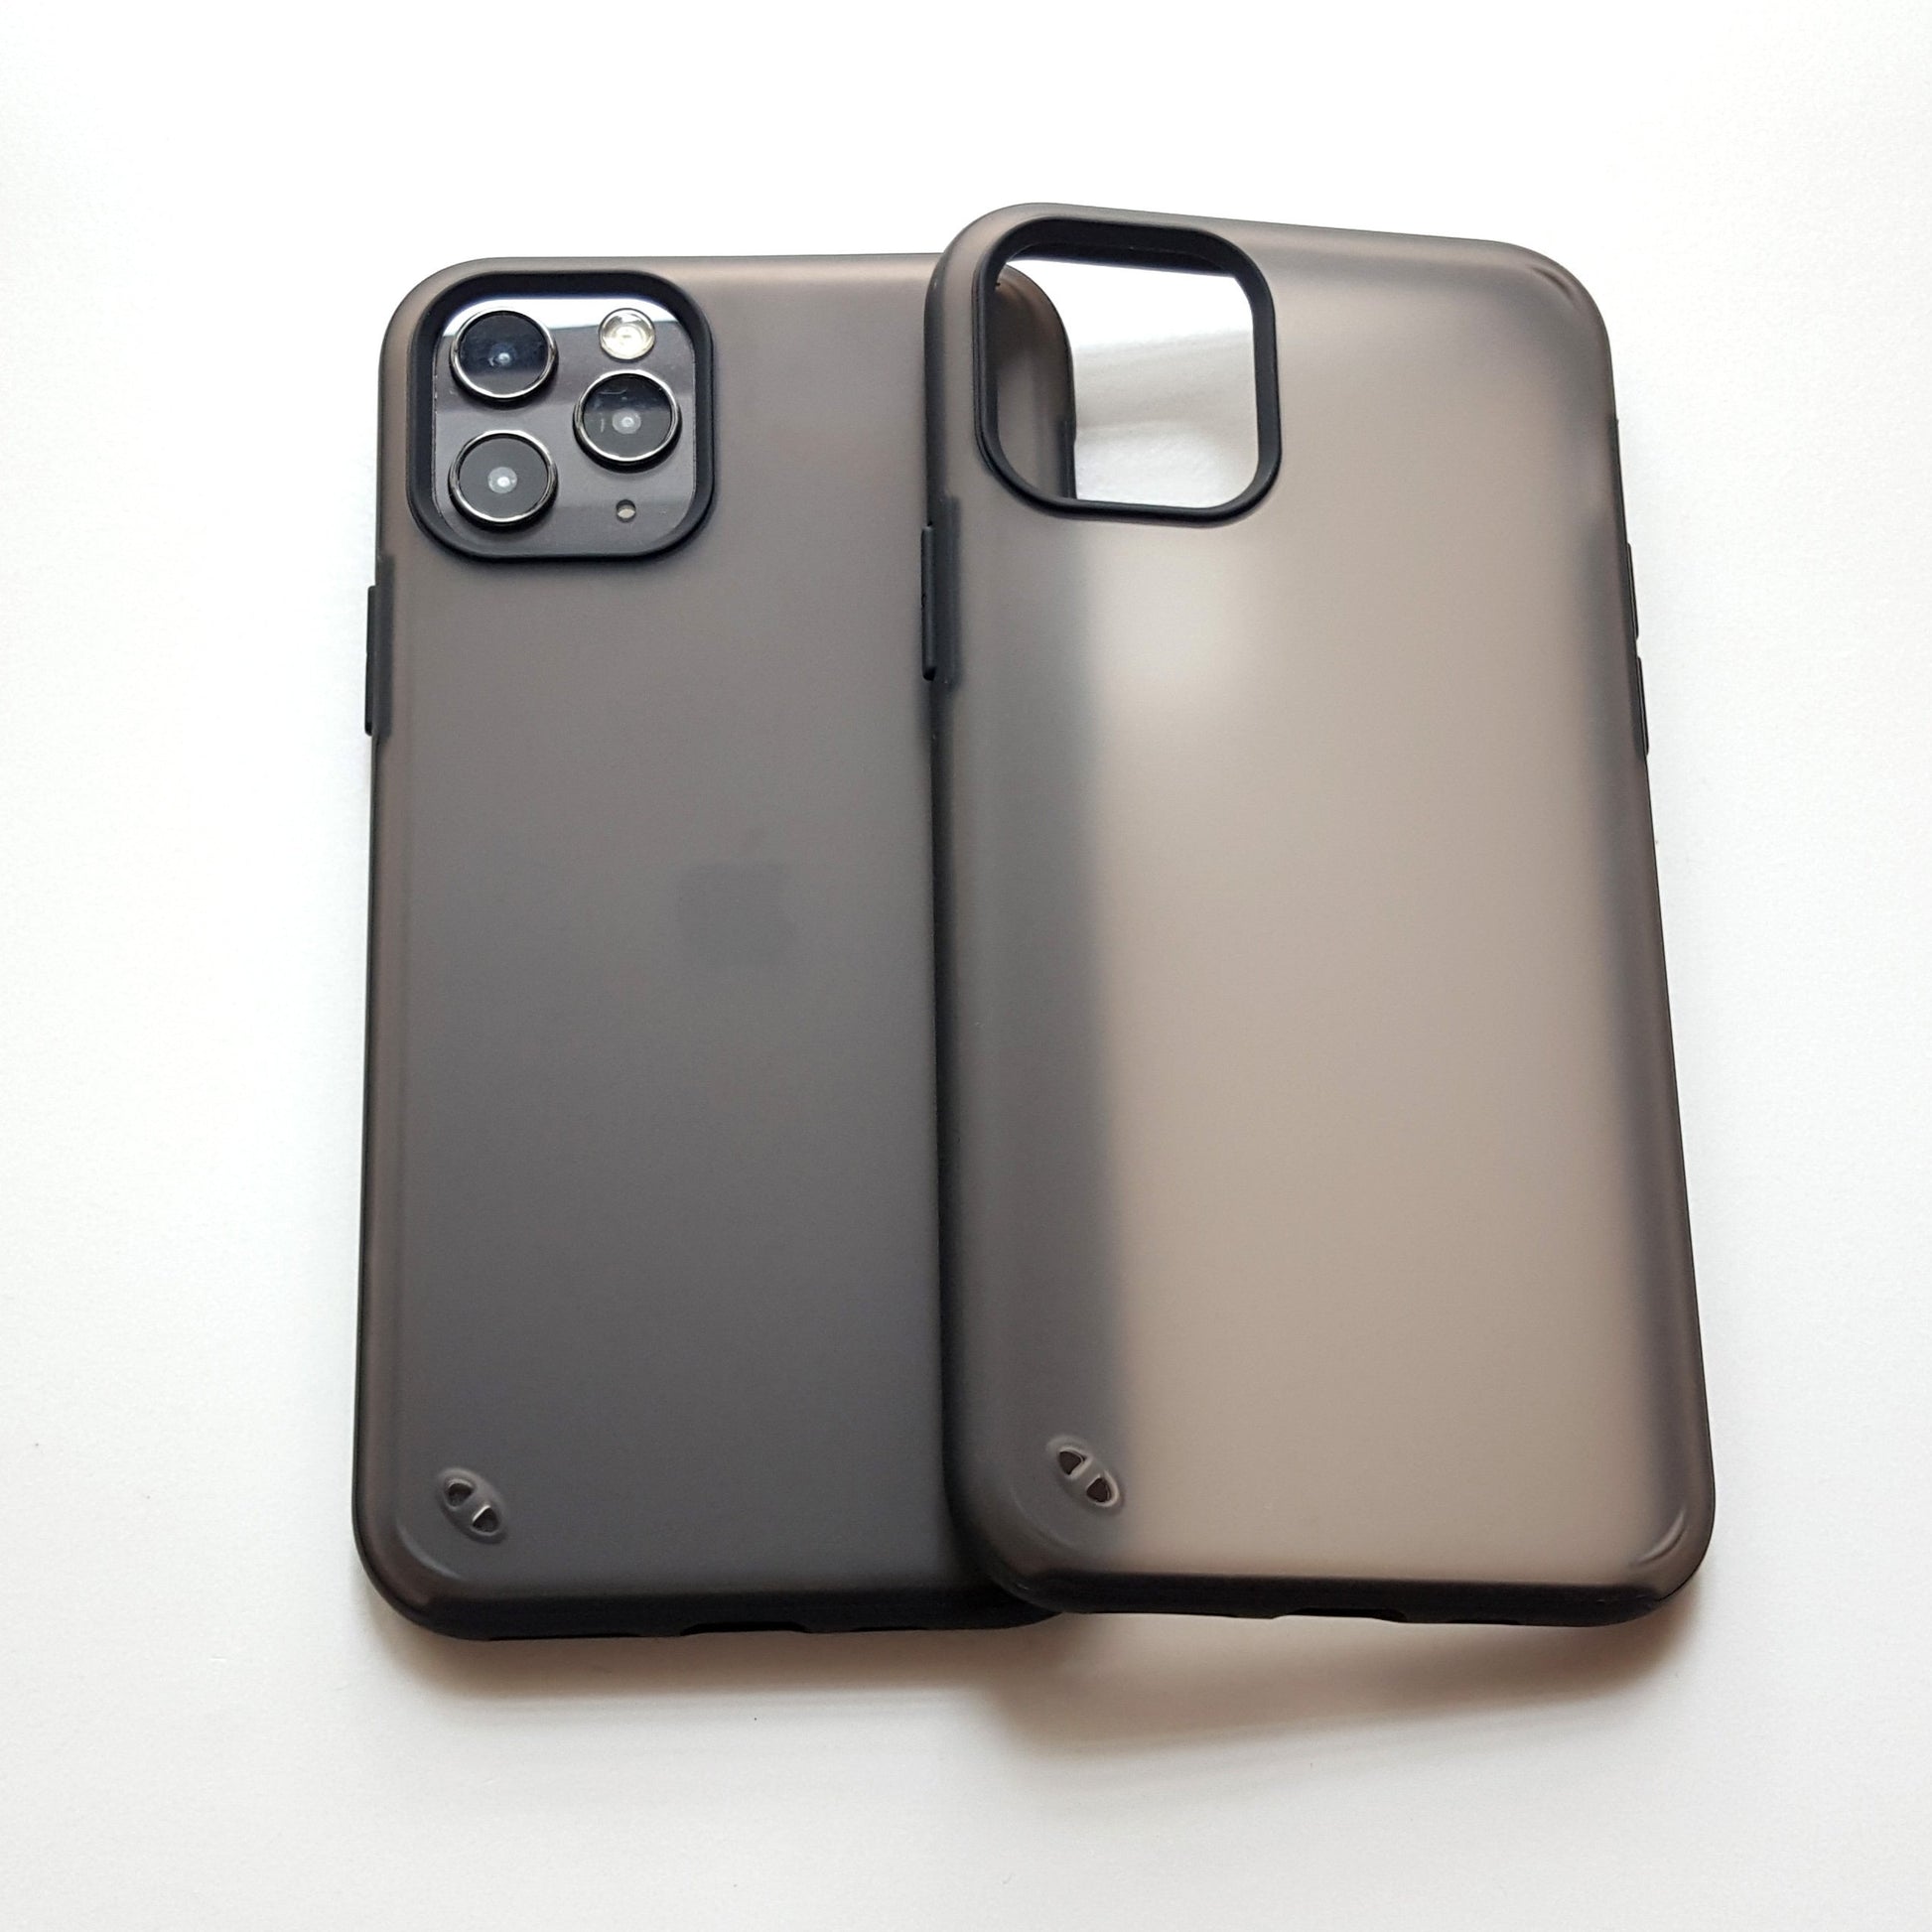 Ultramax Defense Case for iPhone - Happiness Idea